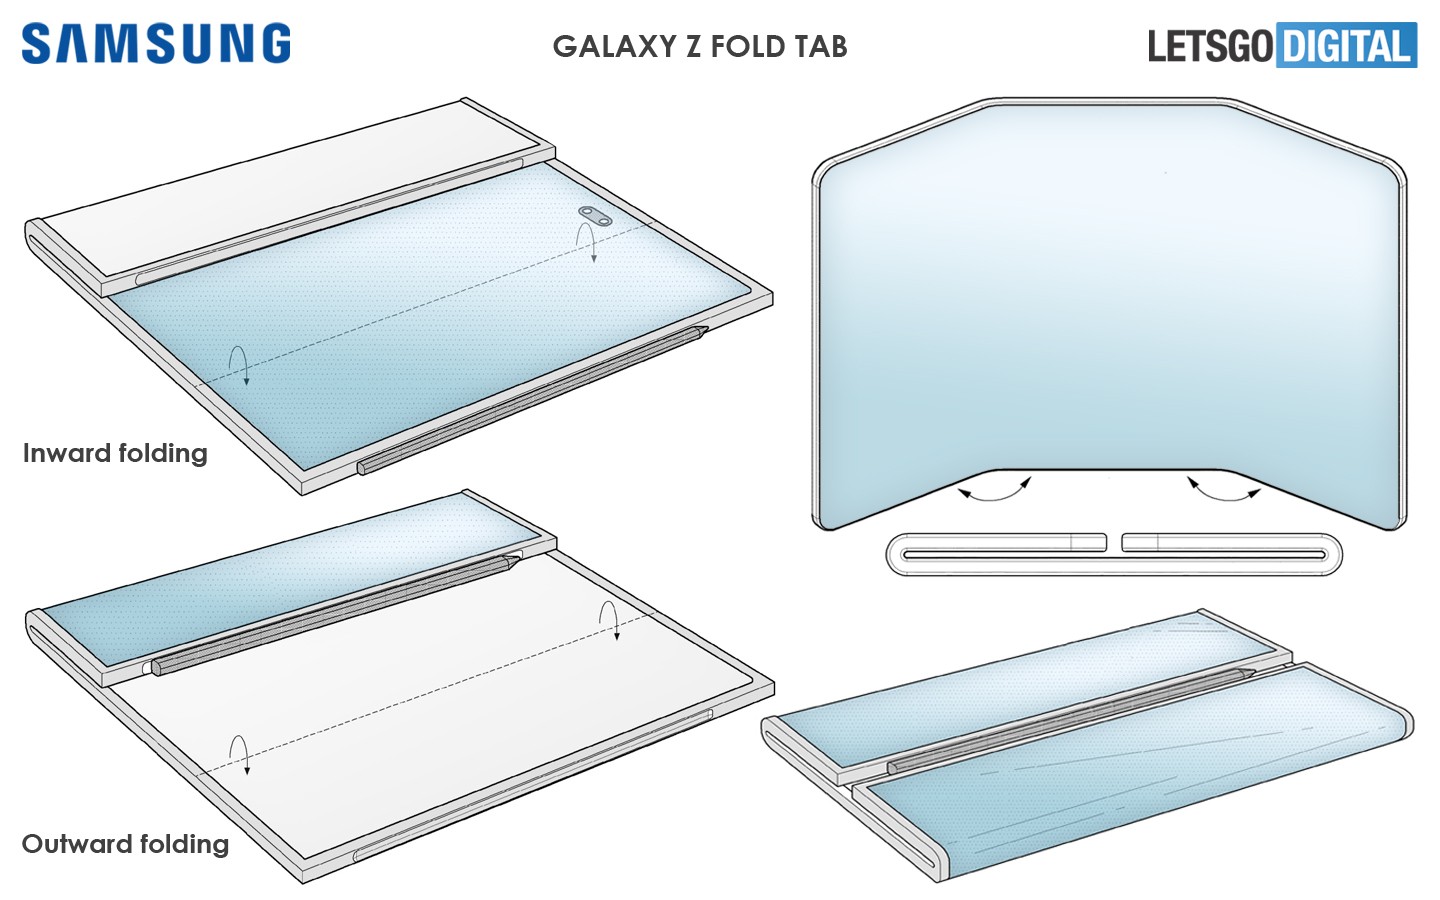 A dual-folding tablet design patented by Samsung